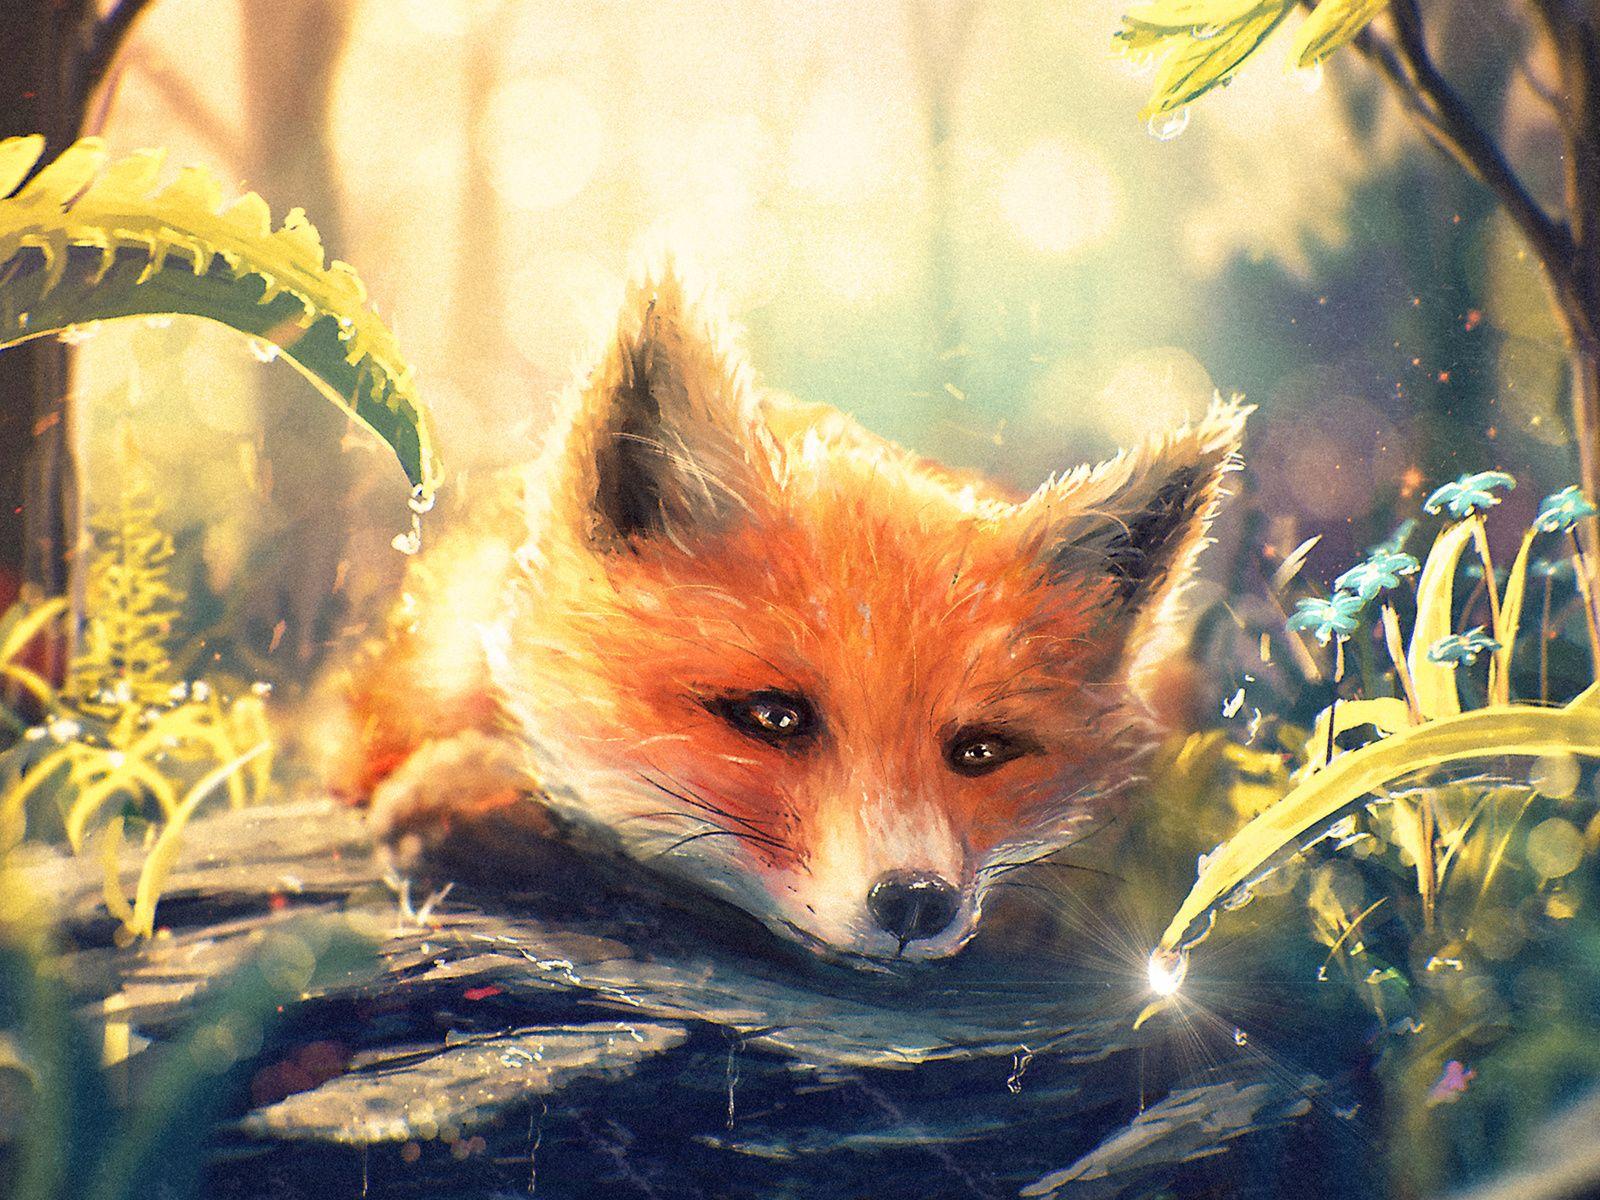 Drop, Painting Ideas, Muzzle, Grass, Forest, Fox, Painting